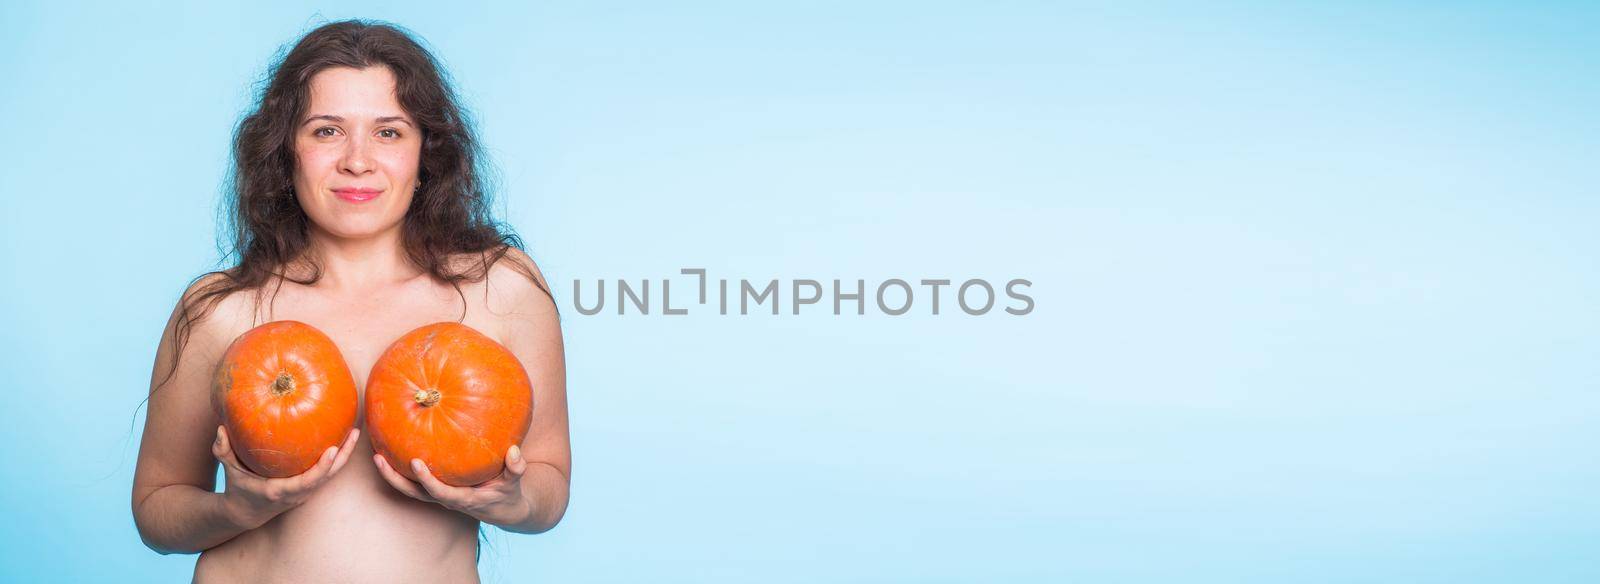 Breasts implant banner concept - Happy woman holding two pumpkins in front of her breasts on blue background with copy space and place for advertising by Satura86